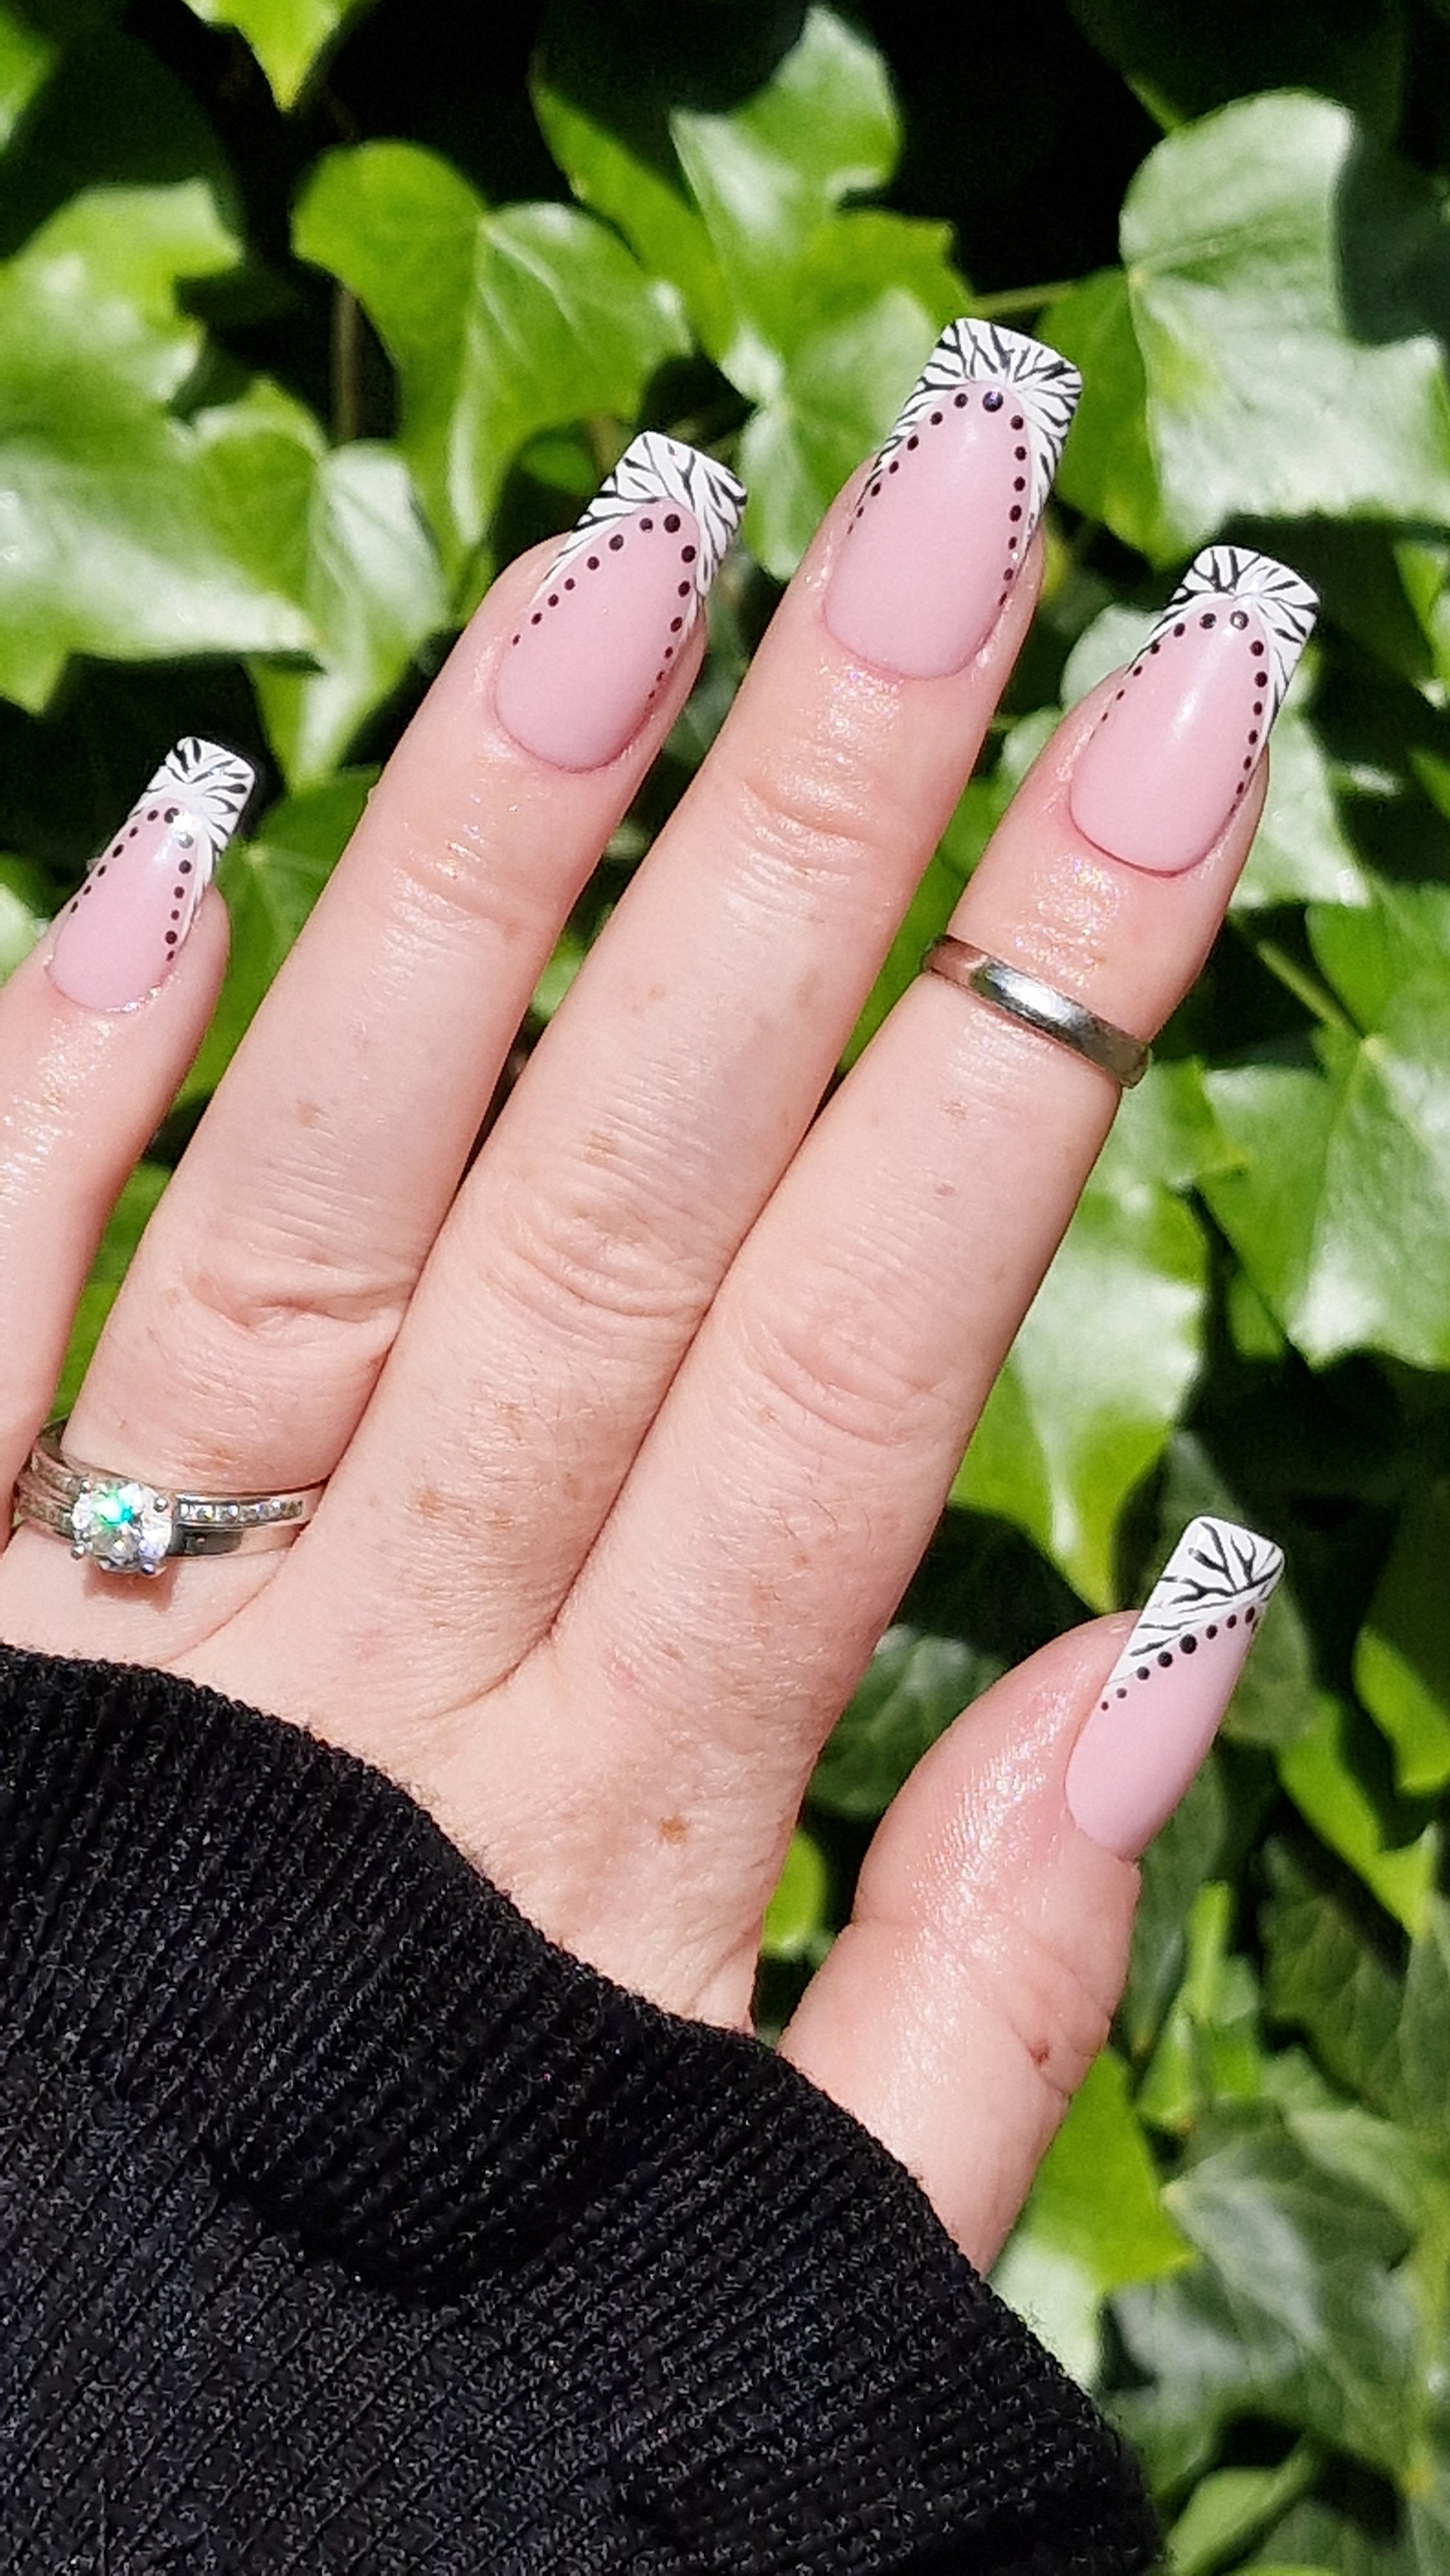 This Gel Manicure Trick Will Save Your Grown-Out Nails